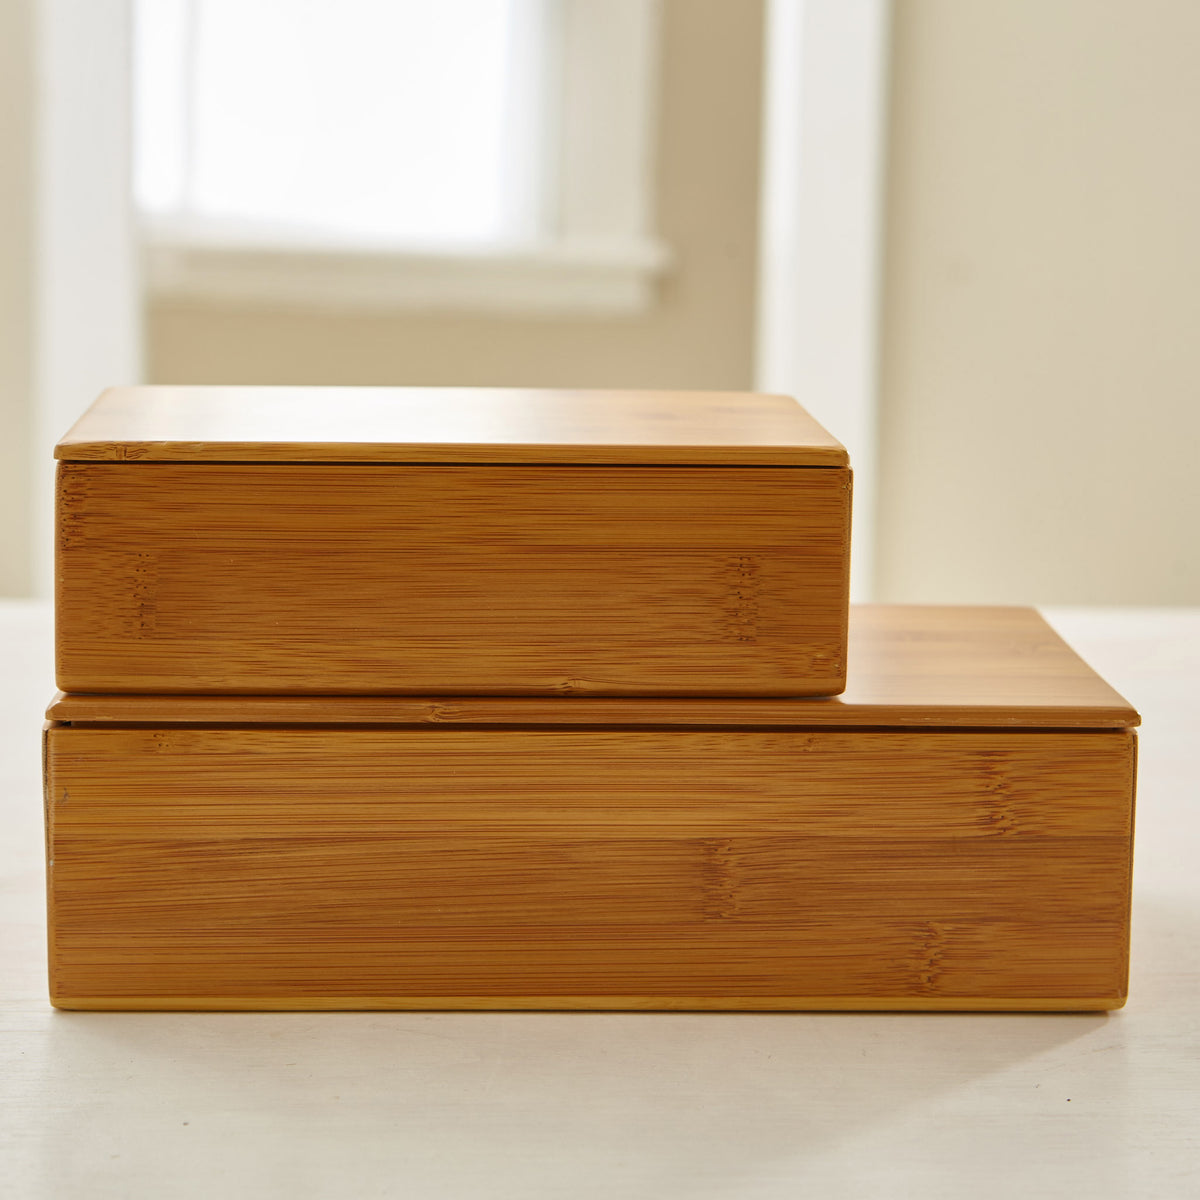 BAMBOO BOXES